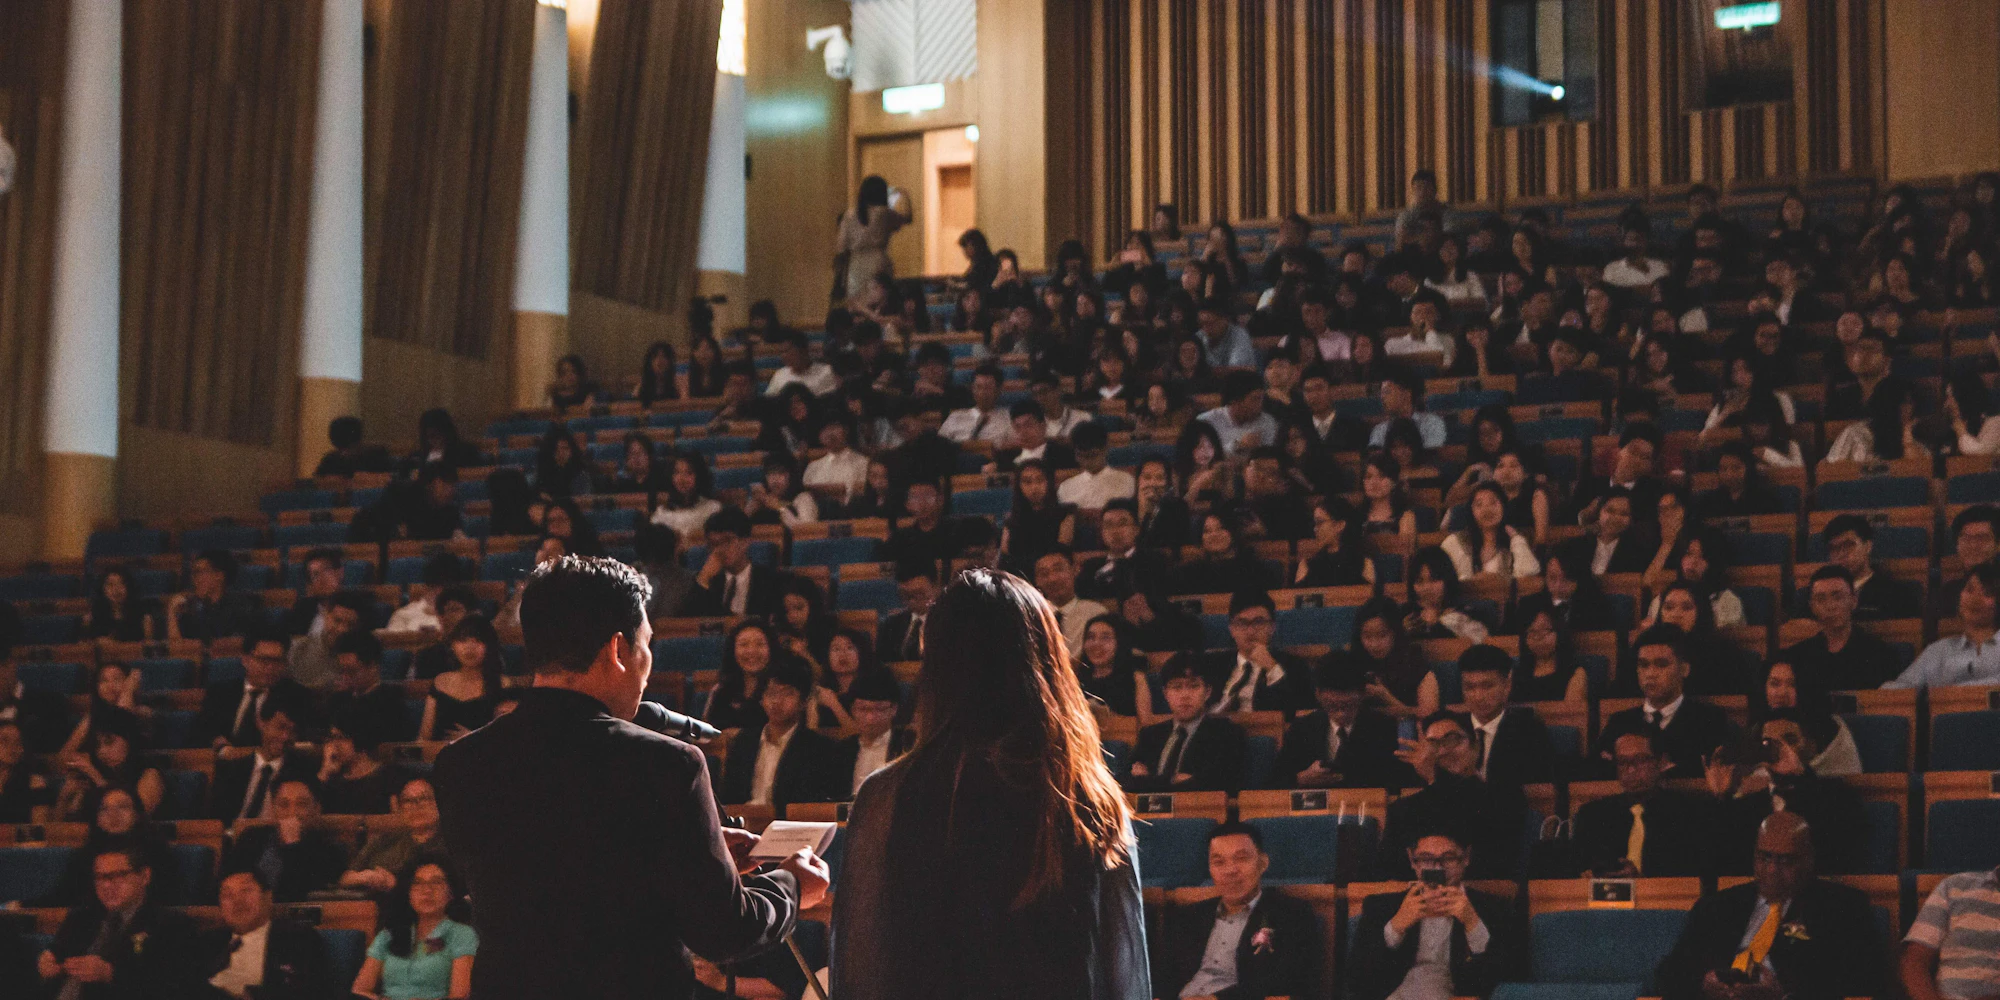 Two speakers presenting in front of a crowded conference hall.